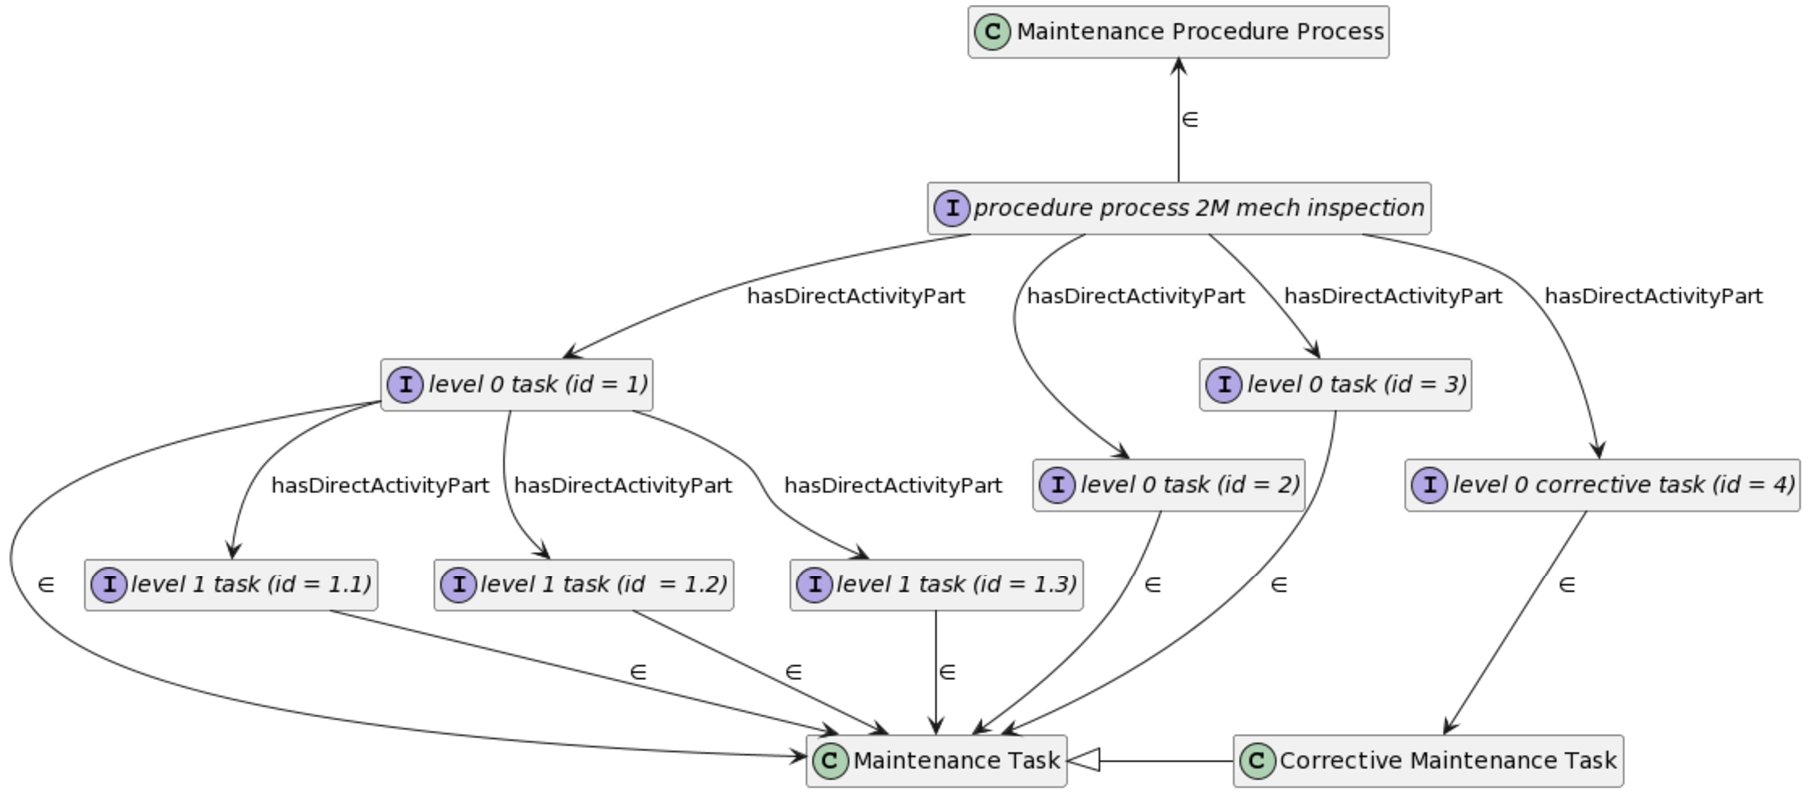 Task hierarchy and corrective maintenance tasks mapped from company 1’s procedure.